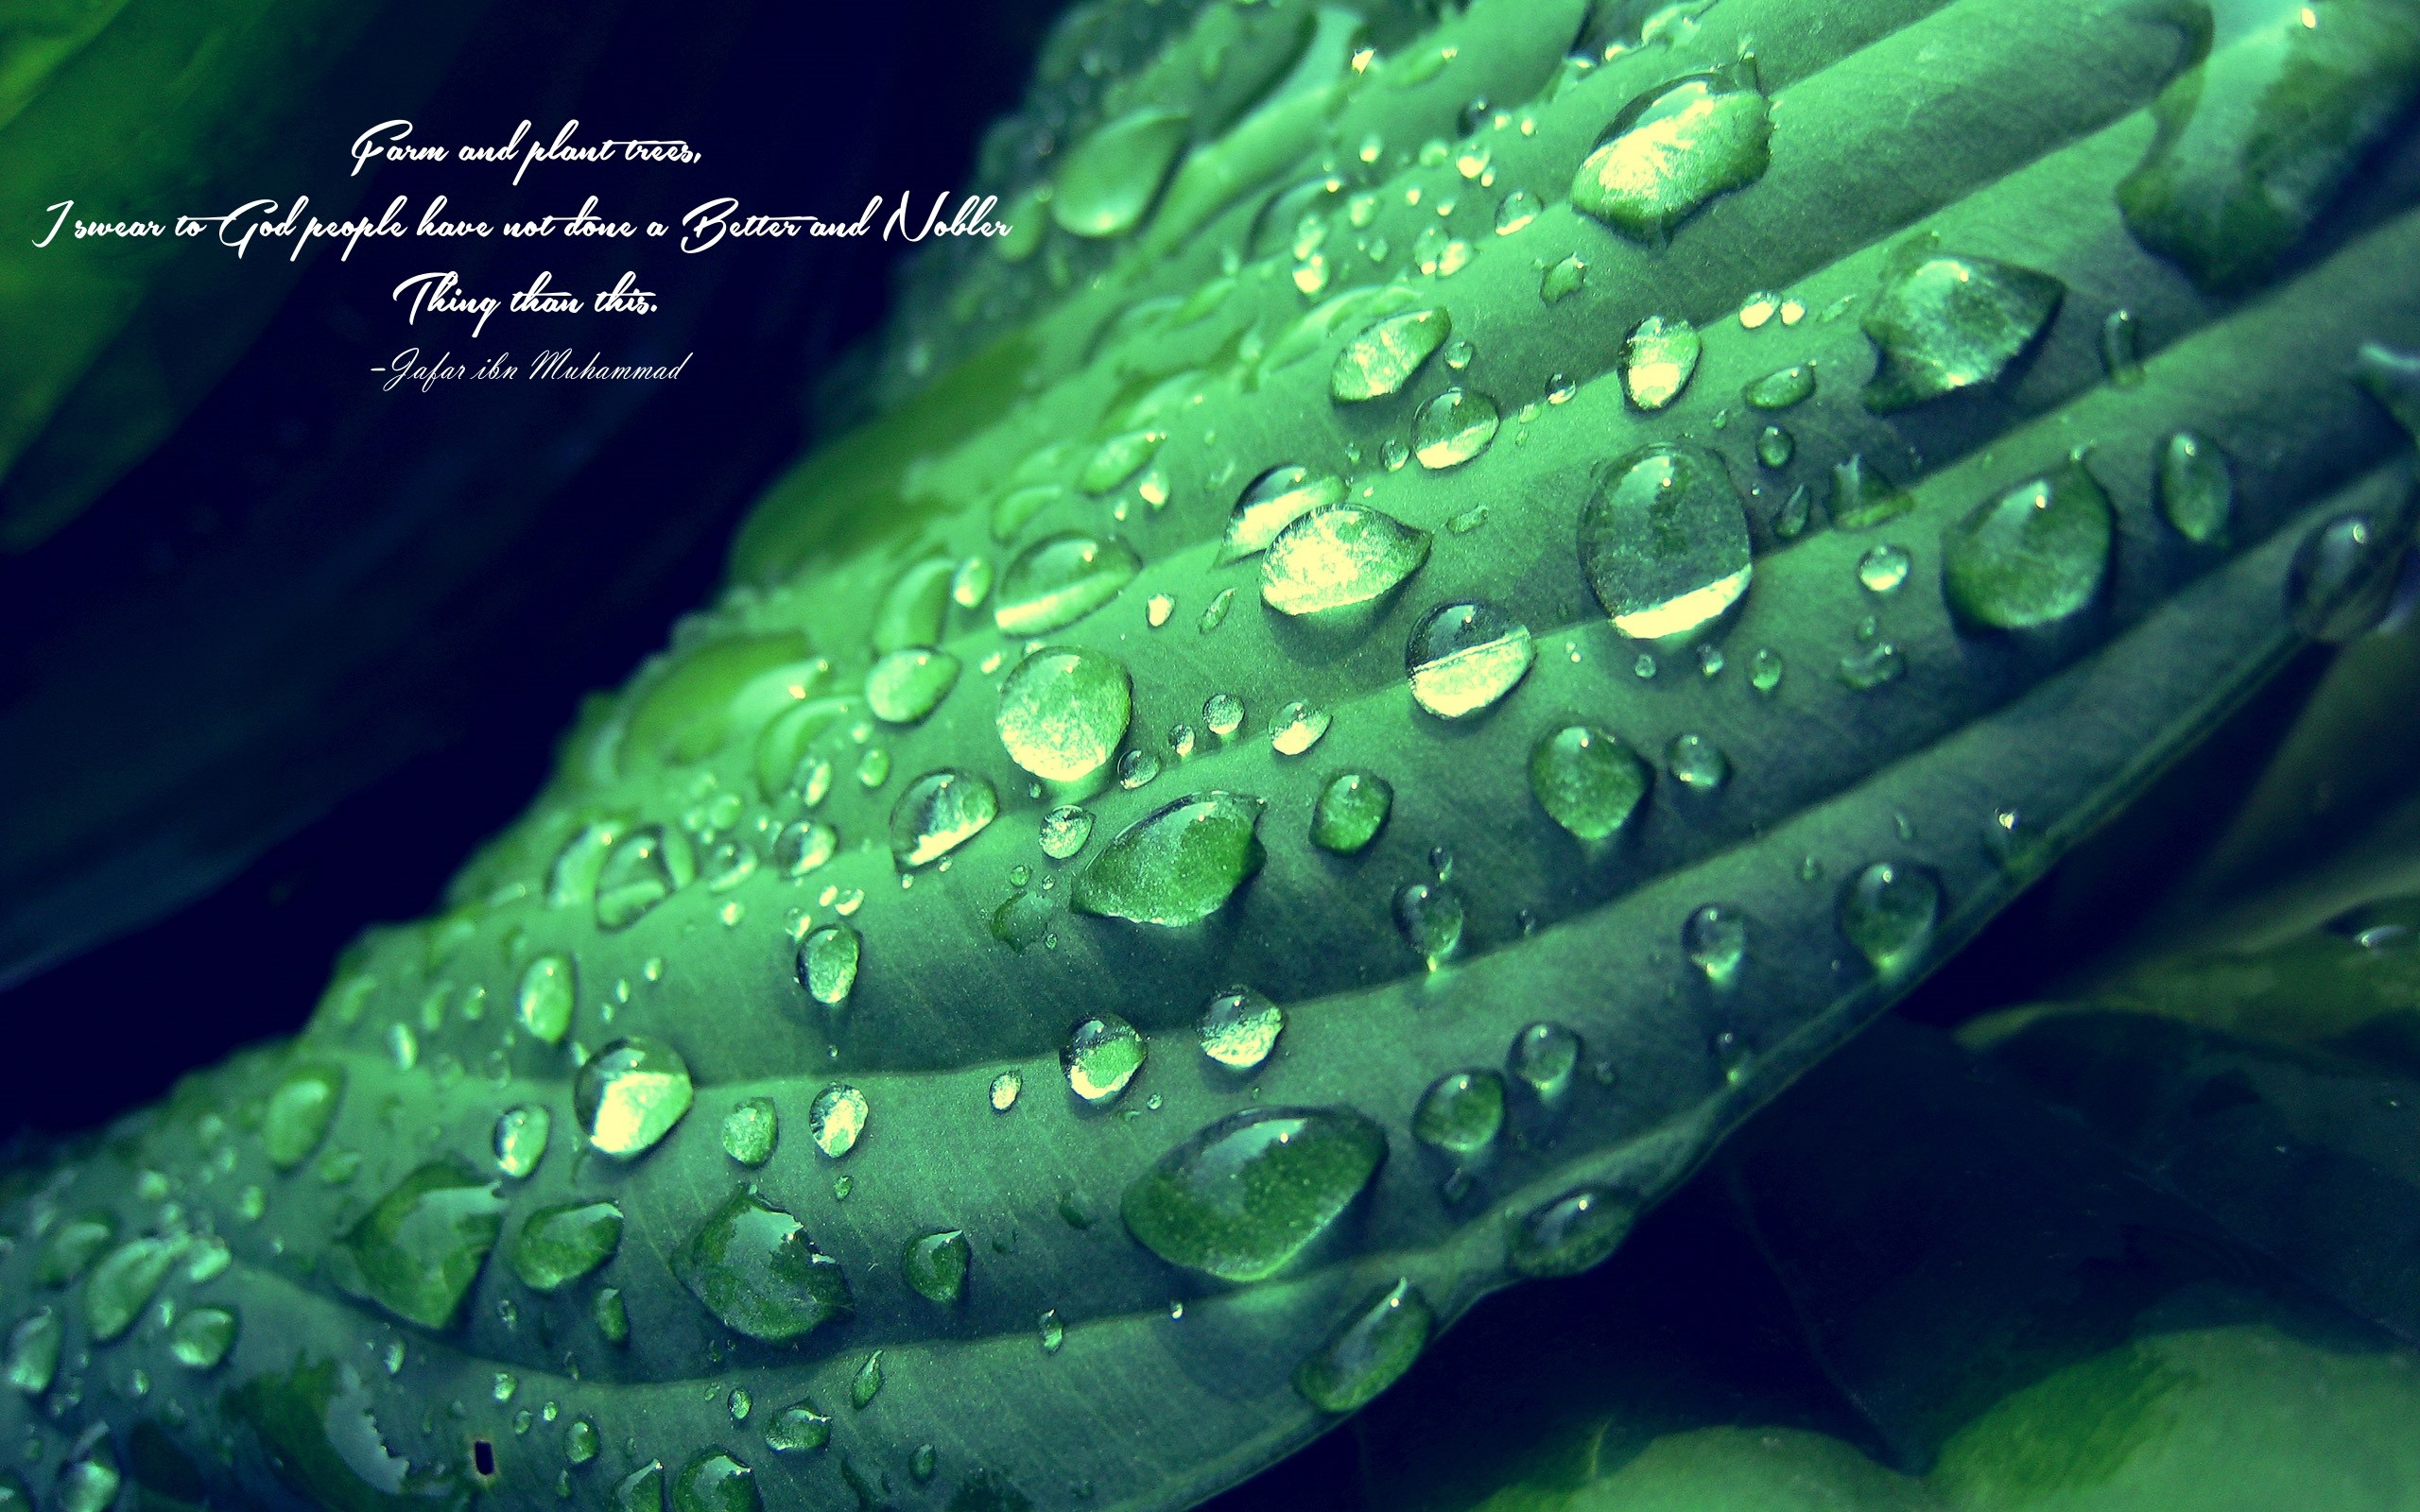 Islam Imam Green Depth Of Field Quote Leaves Water Drops 2560x1600